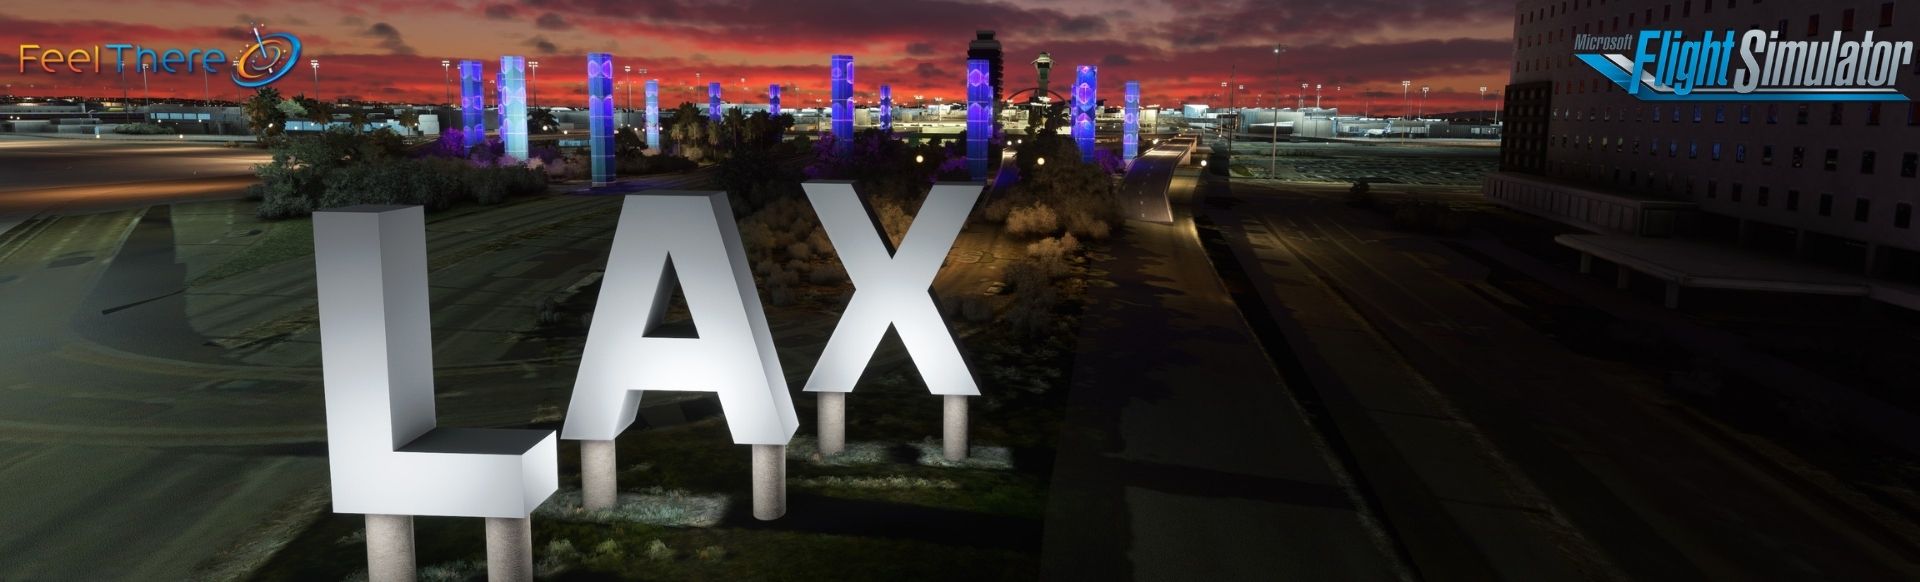 LAX scenery by FeelThere